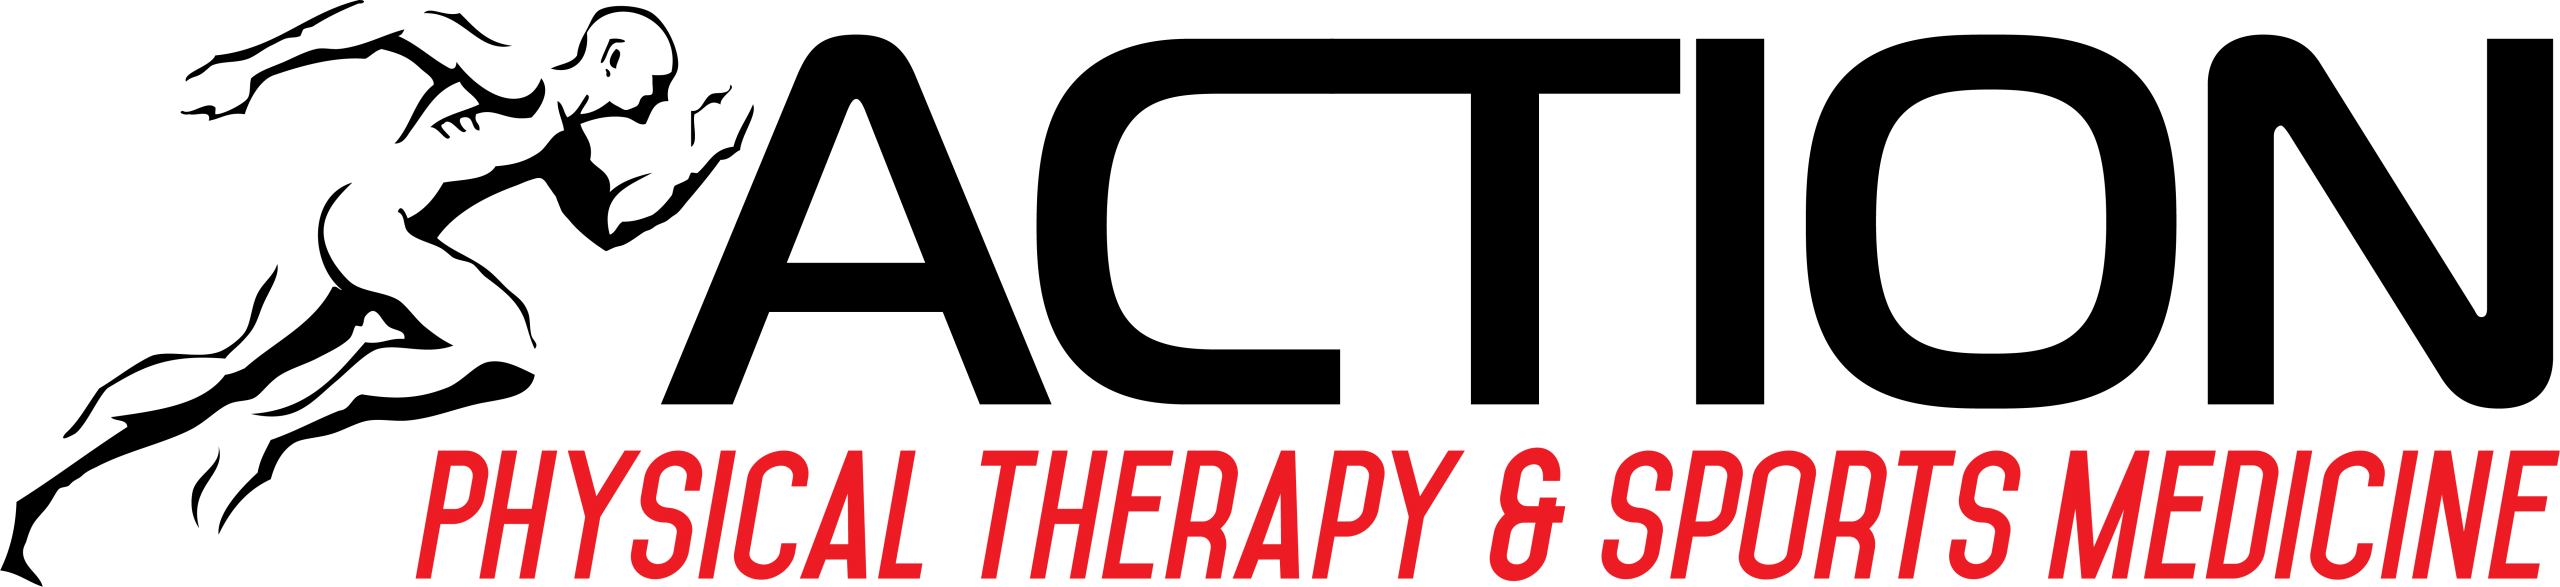 action pt transparent logo physical therapy